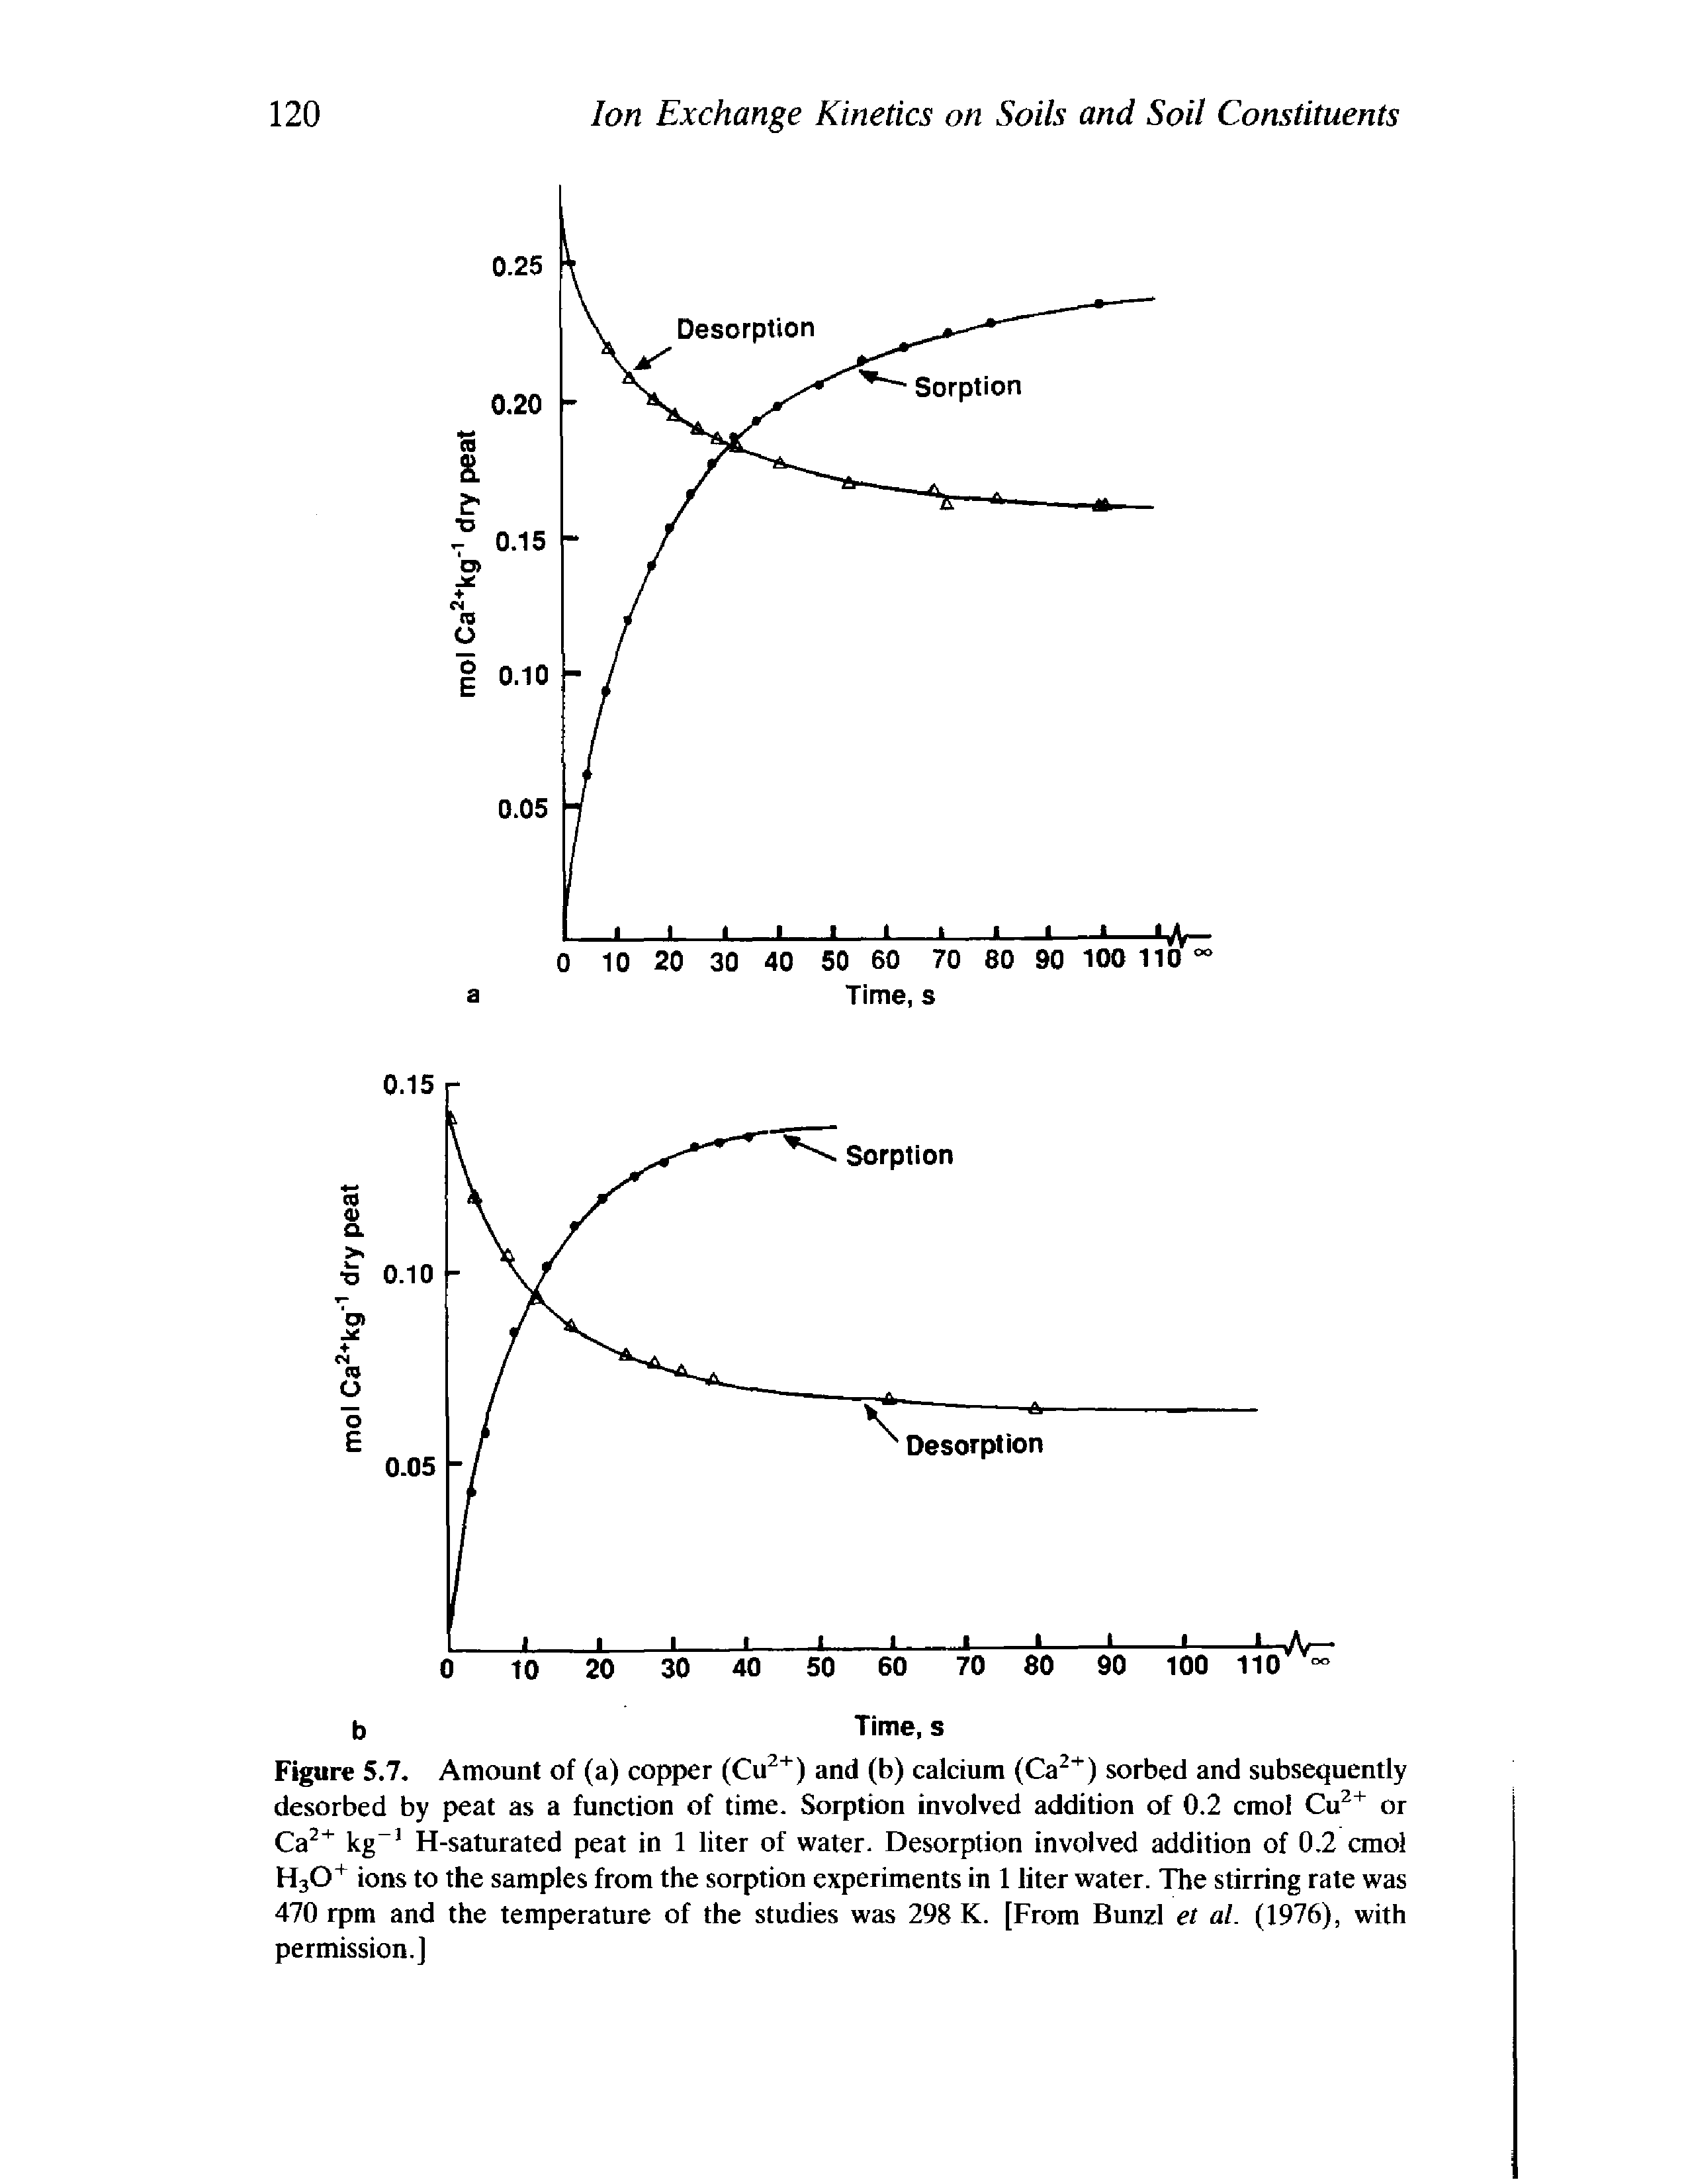 Figure 5.7. Amount of (a) copper (Cu2+) and (b) calcium (Ca2+) sorbed and subsequently desorbed by peat as a function of time. Sorption involved addition of 0.2 cmol Cu2+ or Ca2+ kg-1 H-saturated peat in 1 liter of water. Desorption involved addition of 0.2 cmol H30+ ions to the samples from the sorption experiments in 1 liter water. The stirring rate was 470 rpm and the temperature of the studies was 298 K. [From Bunzl et al. (1976), with permission.]...